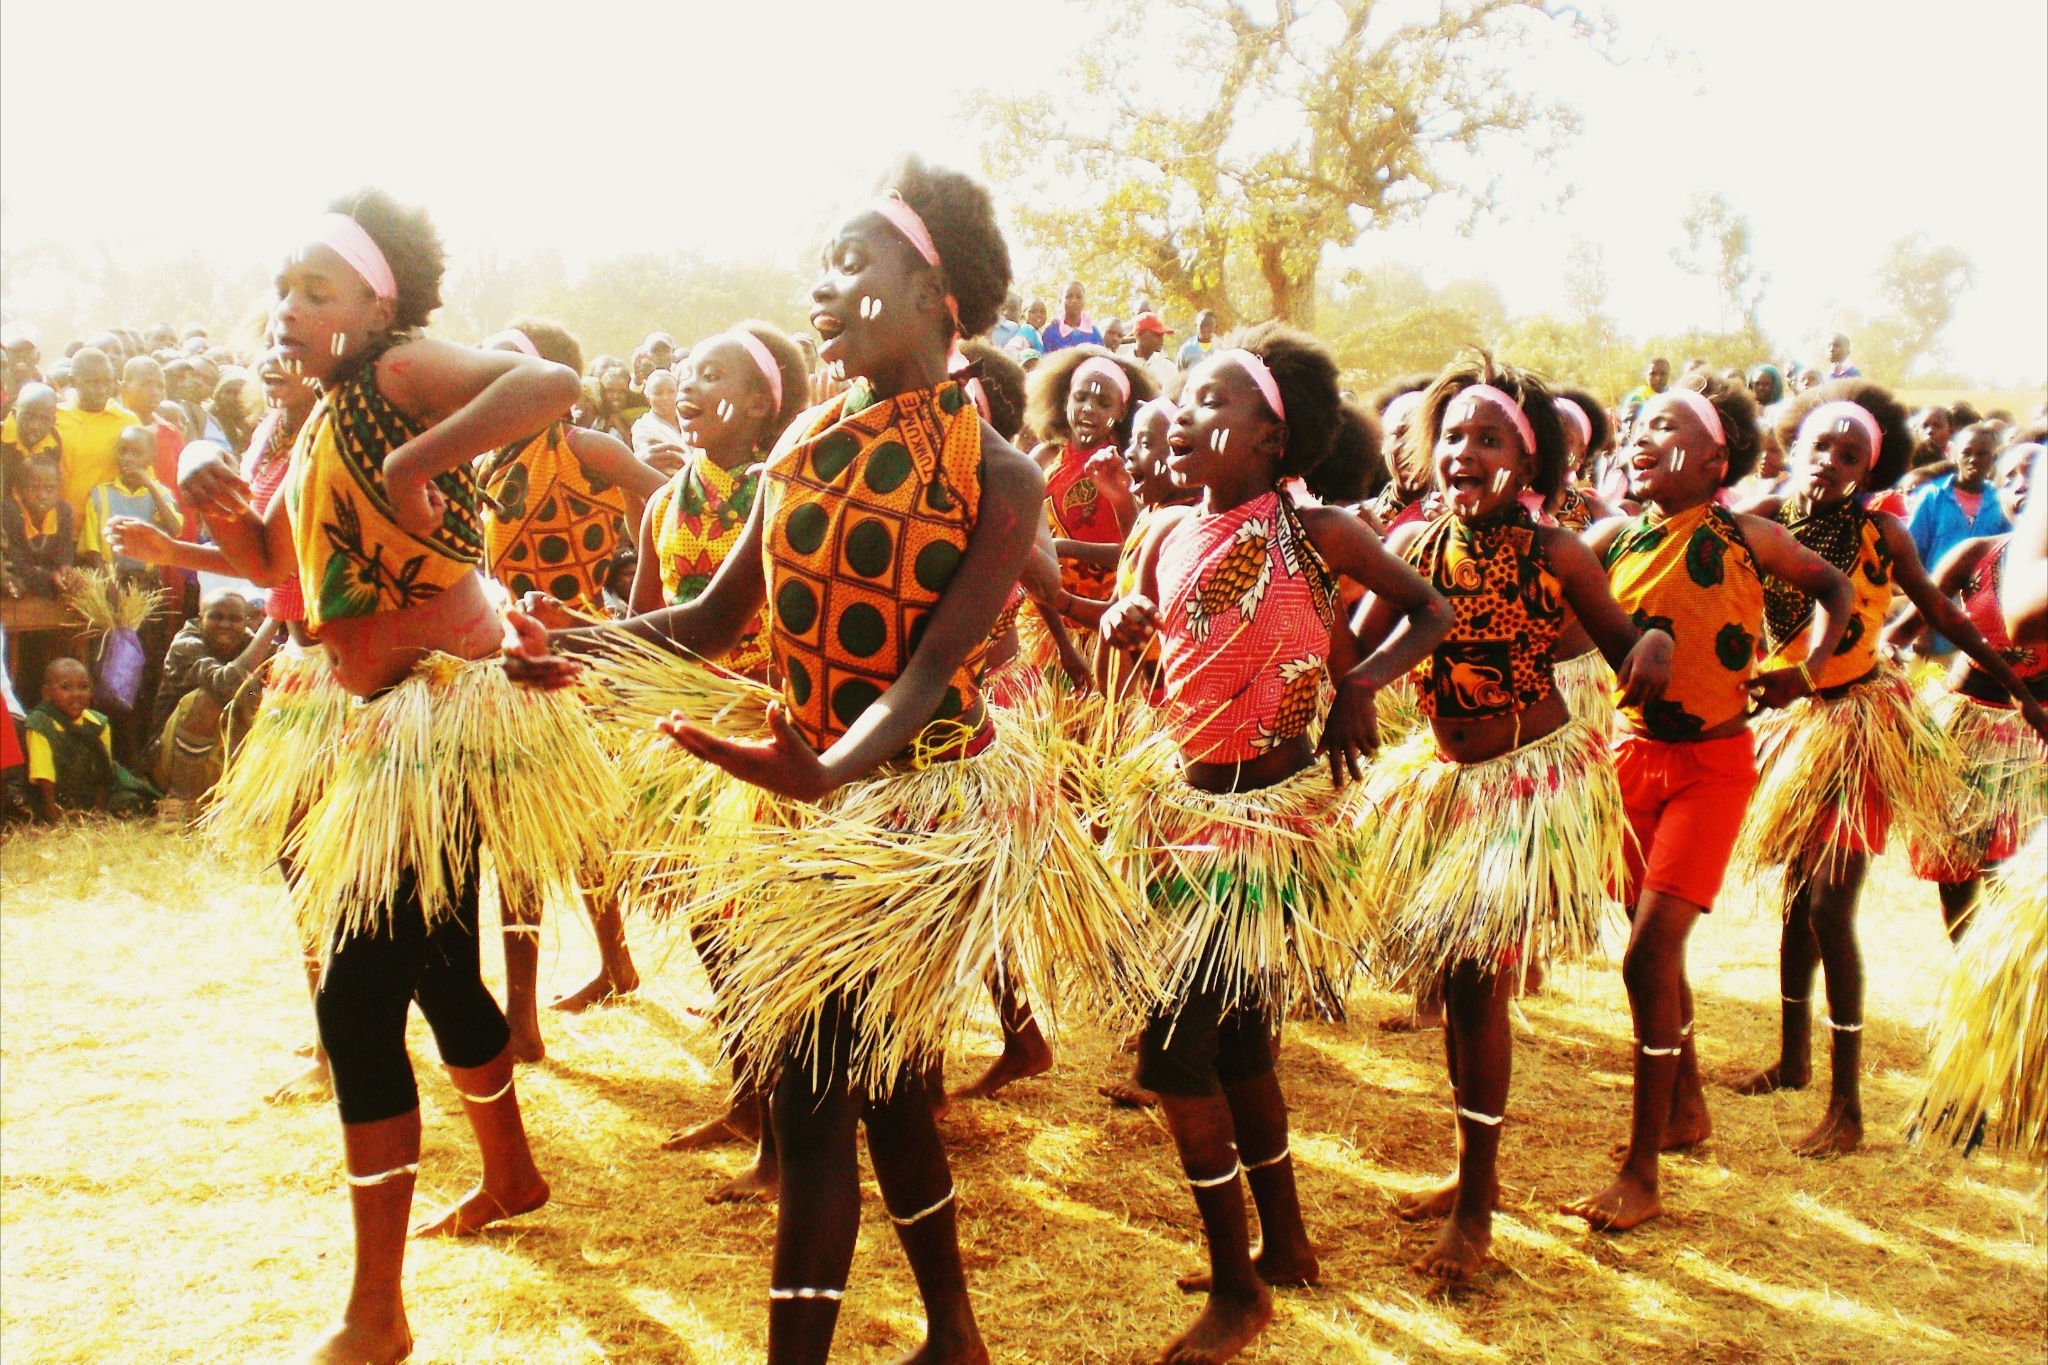 Kenyan Culture And Traditions